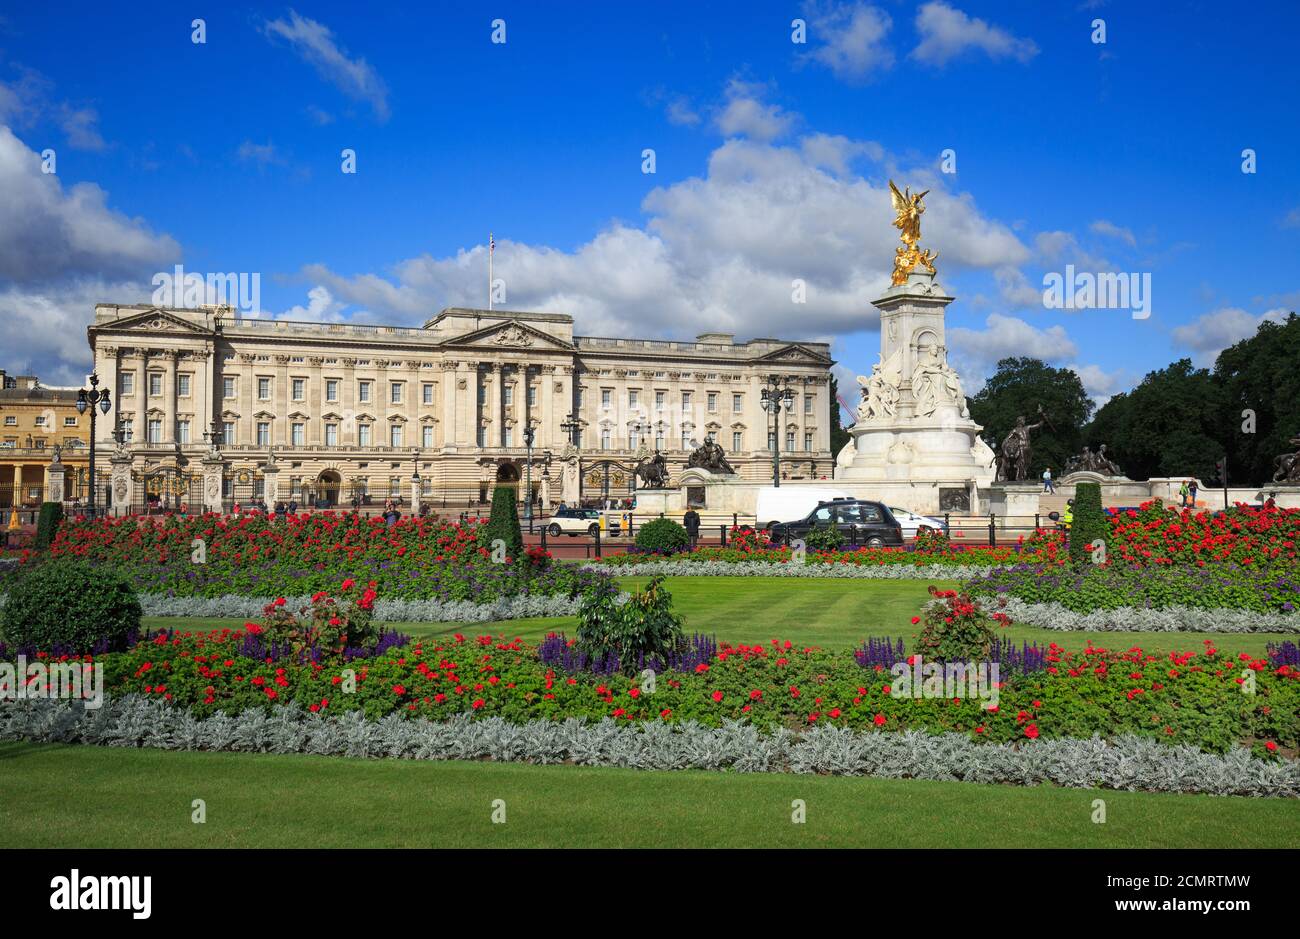 Scenic View of Buckingham Palace taken from Green Park, with flower beds in full bloom against a scenic blue cloudy sky and Queen Victoria Monument. Stock Photo